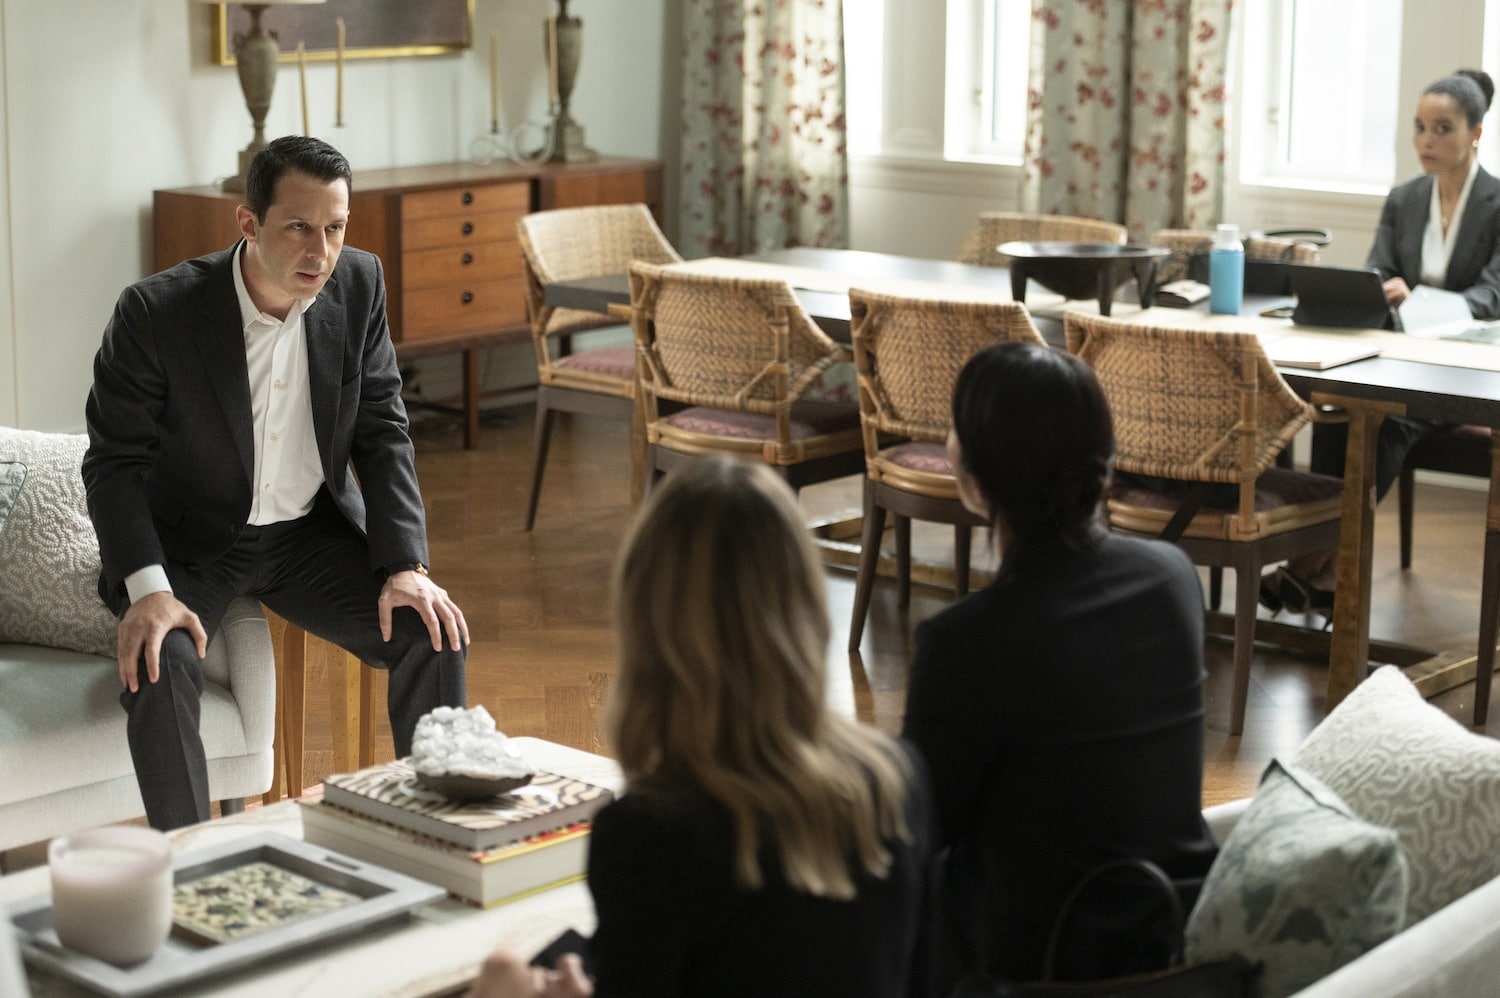 Succession': Which Roy Wins Based on the Real Family Who Inspired the Show?